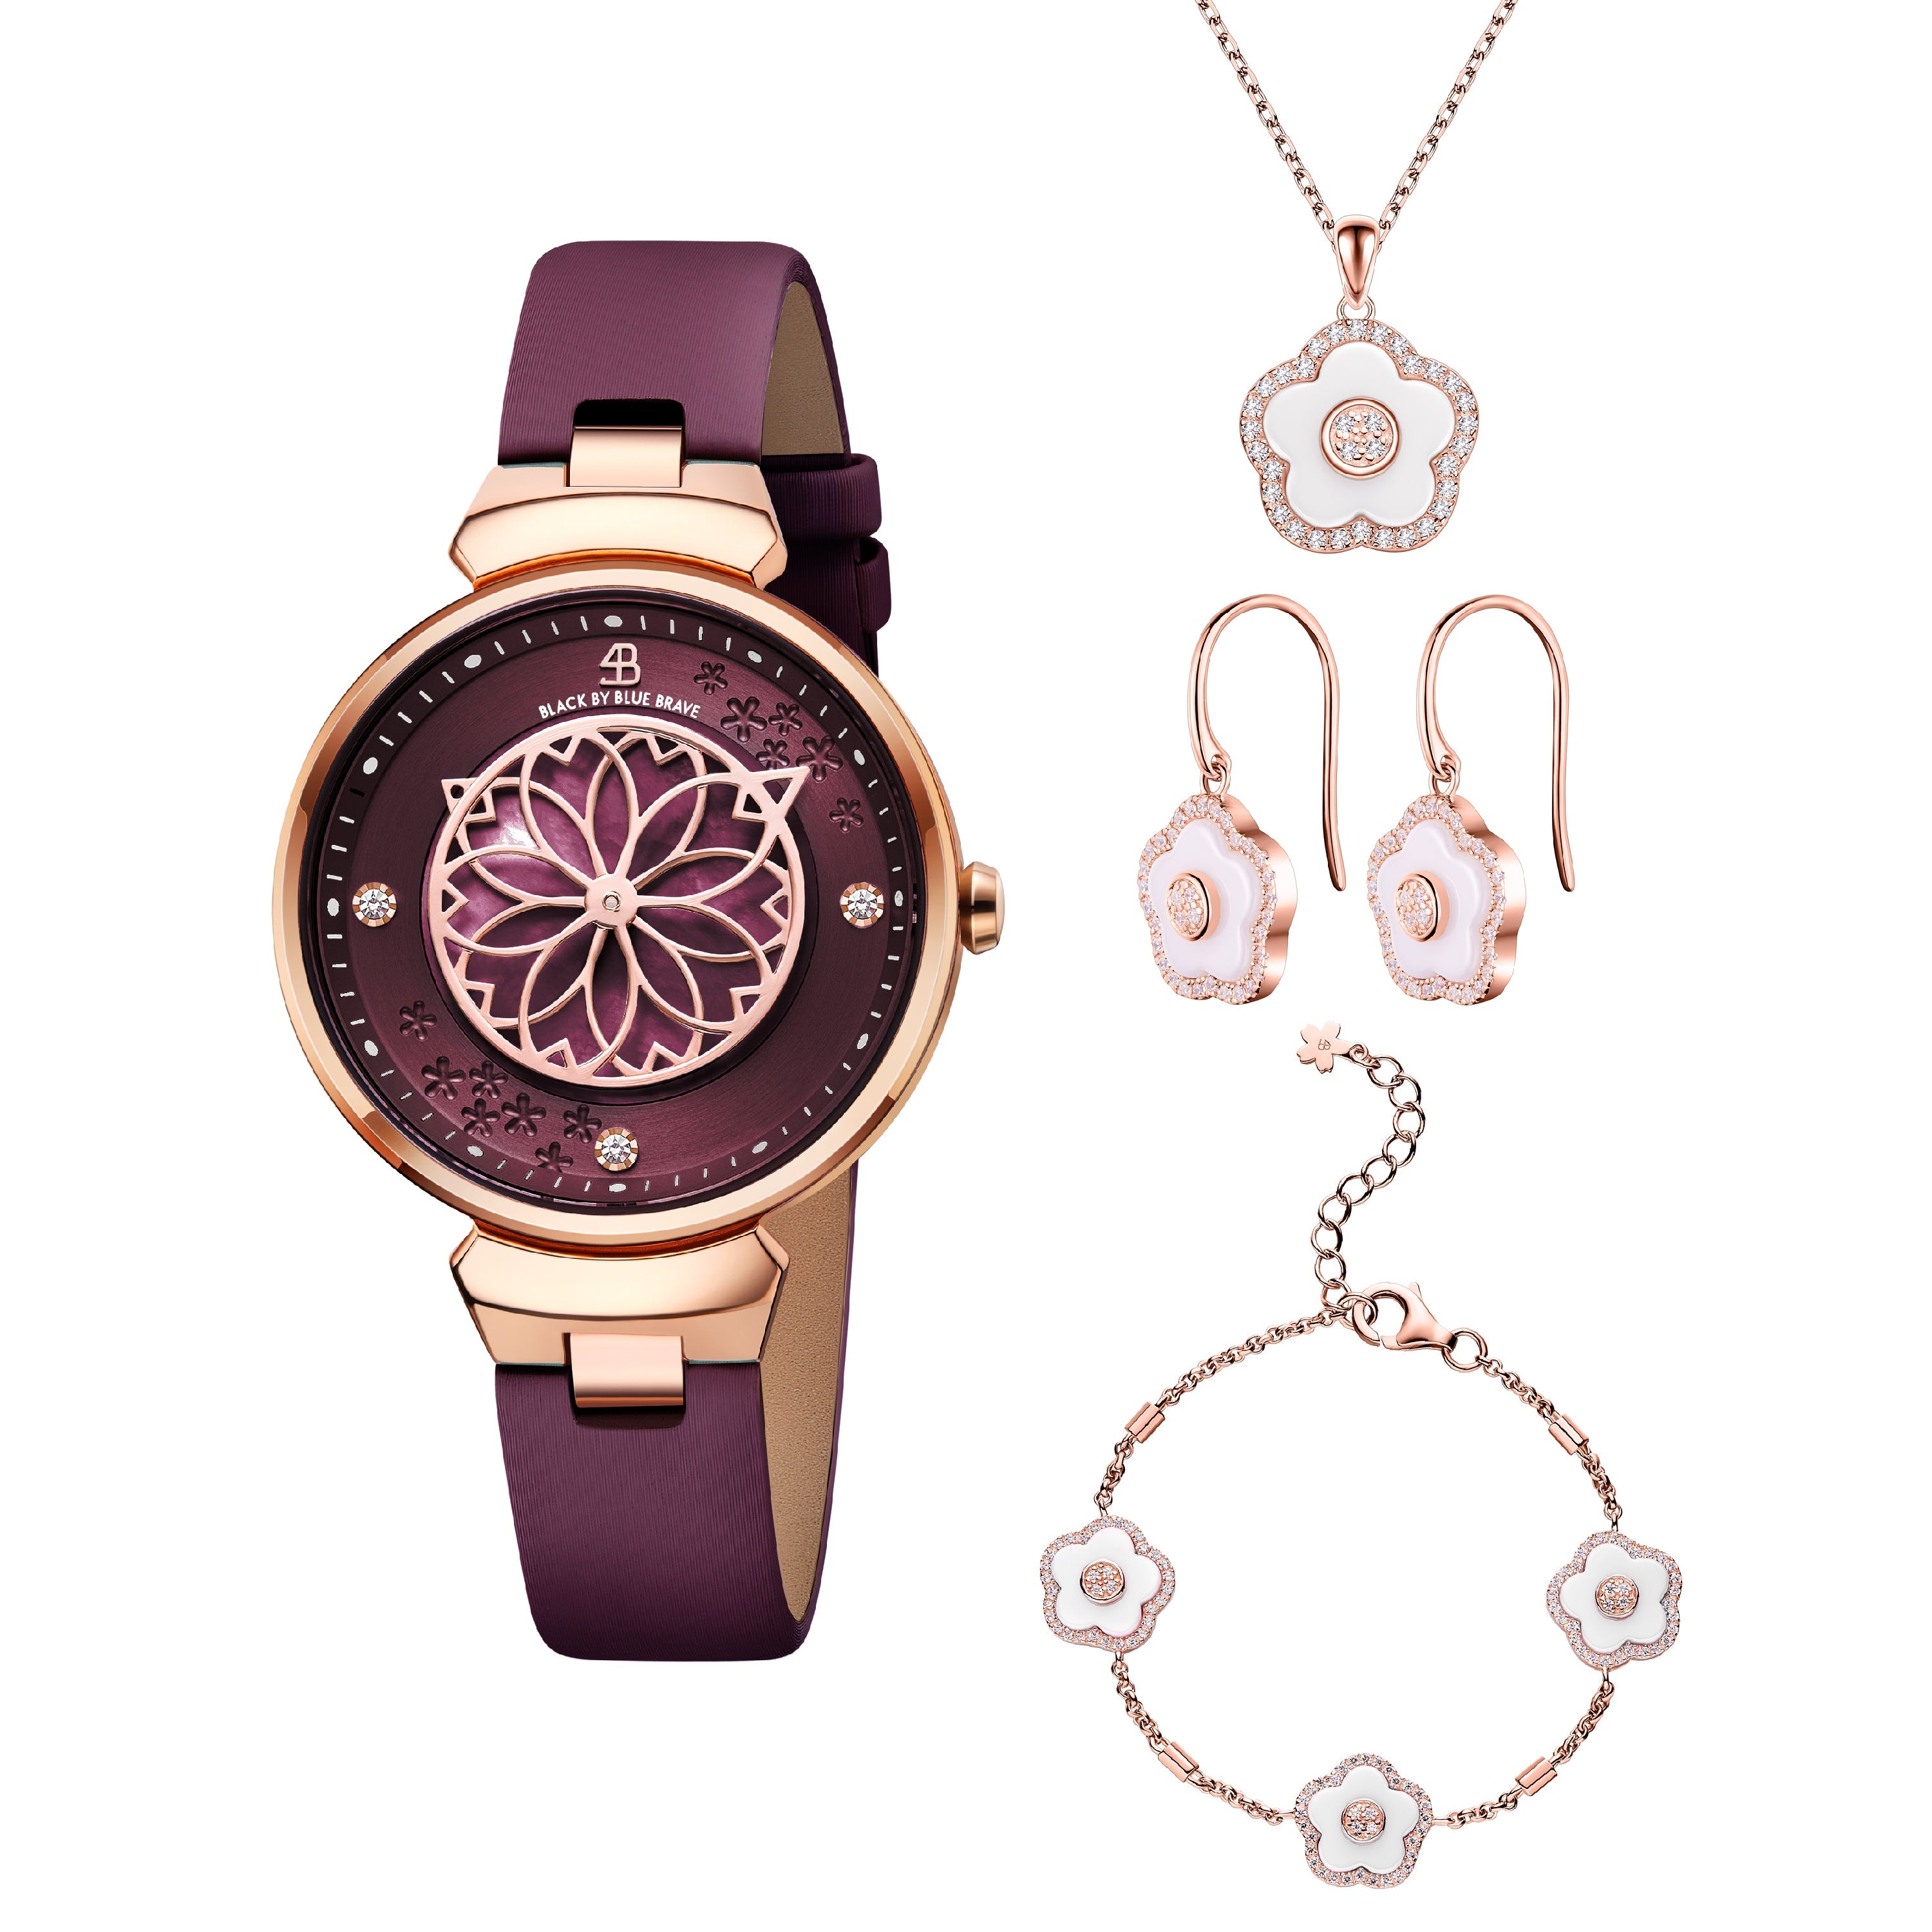 Blue Cherry Blossom Watch With Flower Ceramic  Jewelleries（Earrings & Bracelet & Necklace）